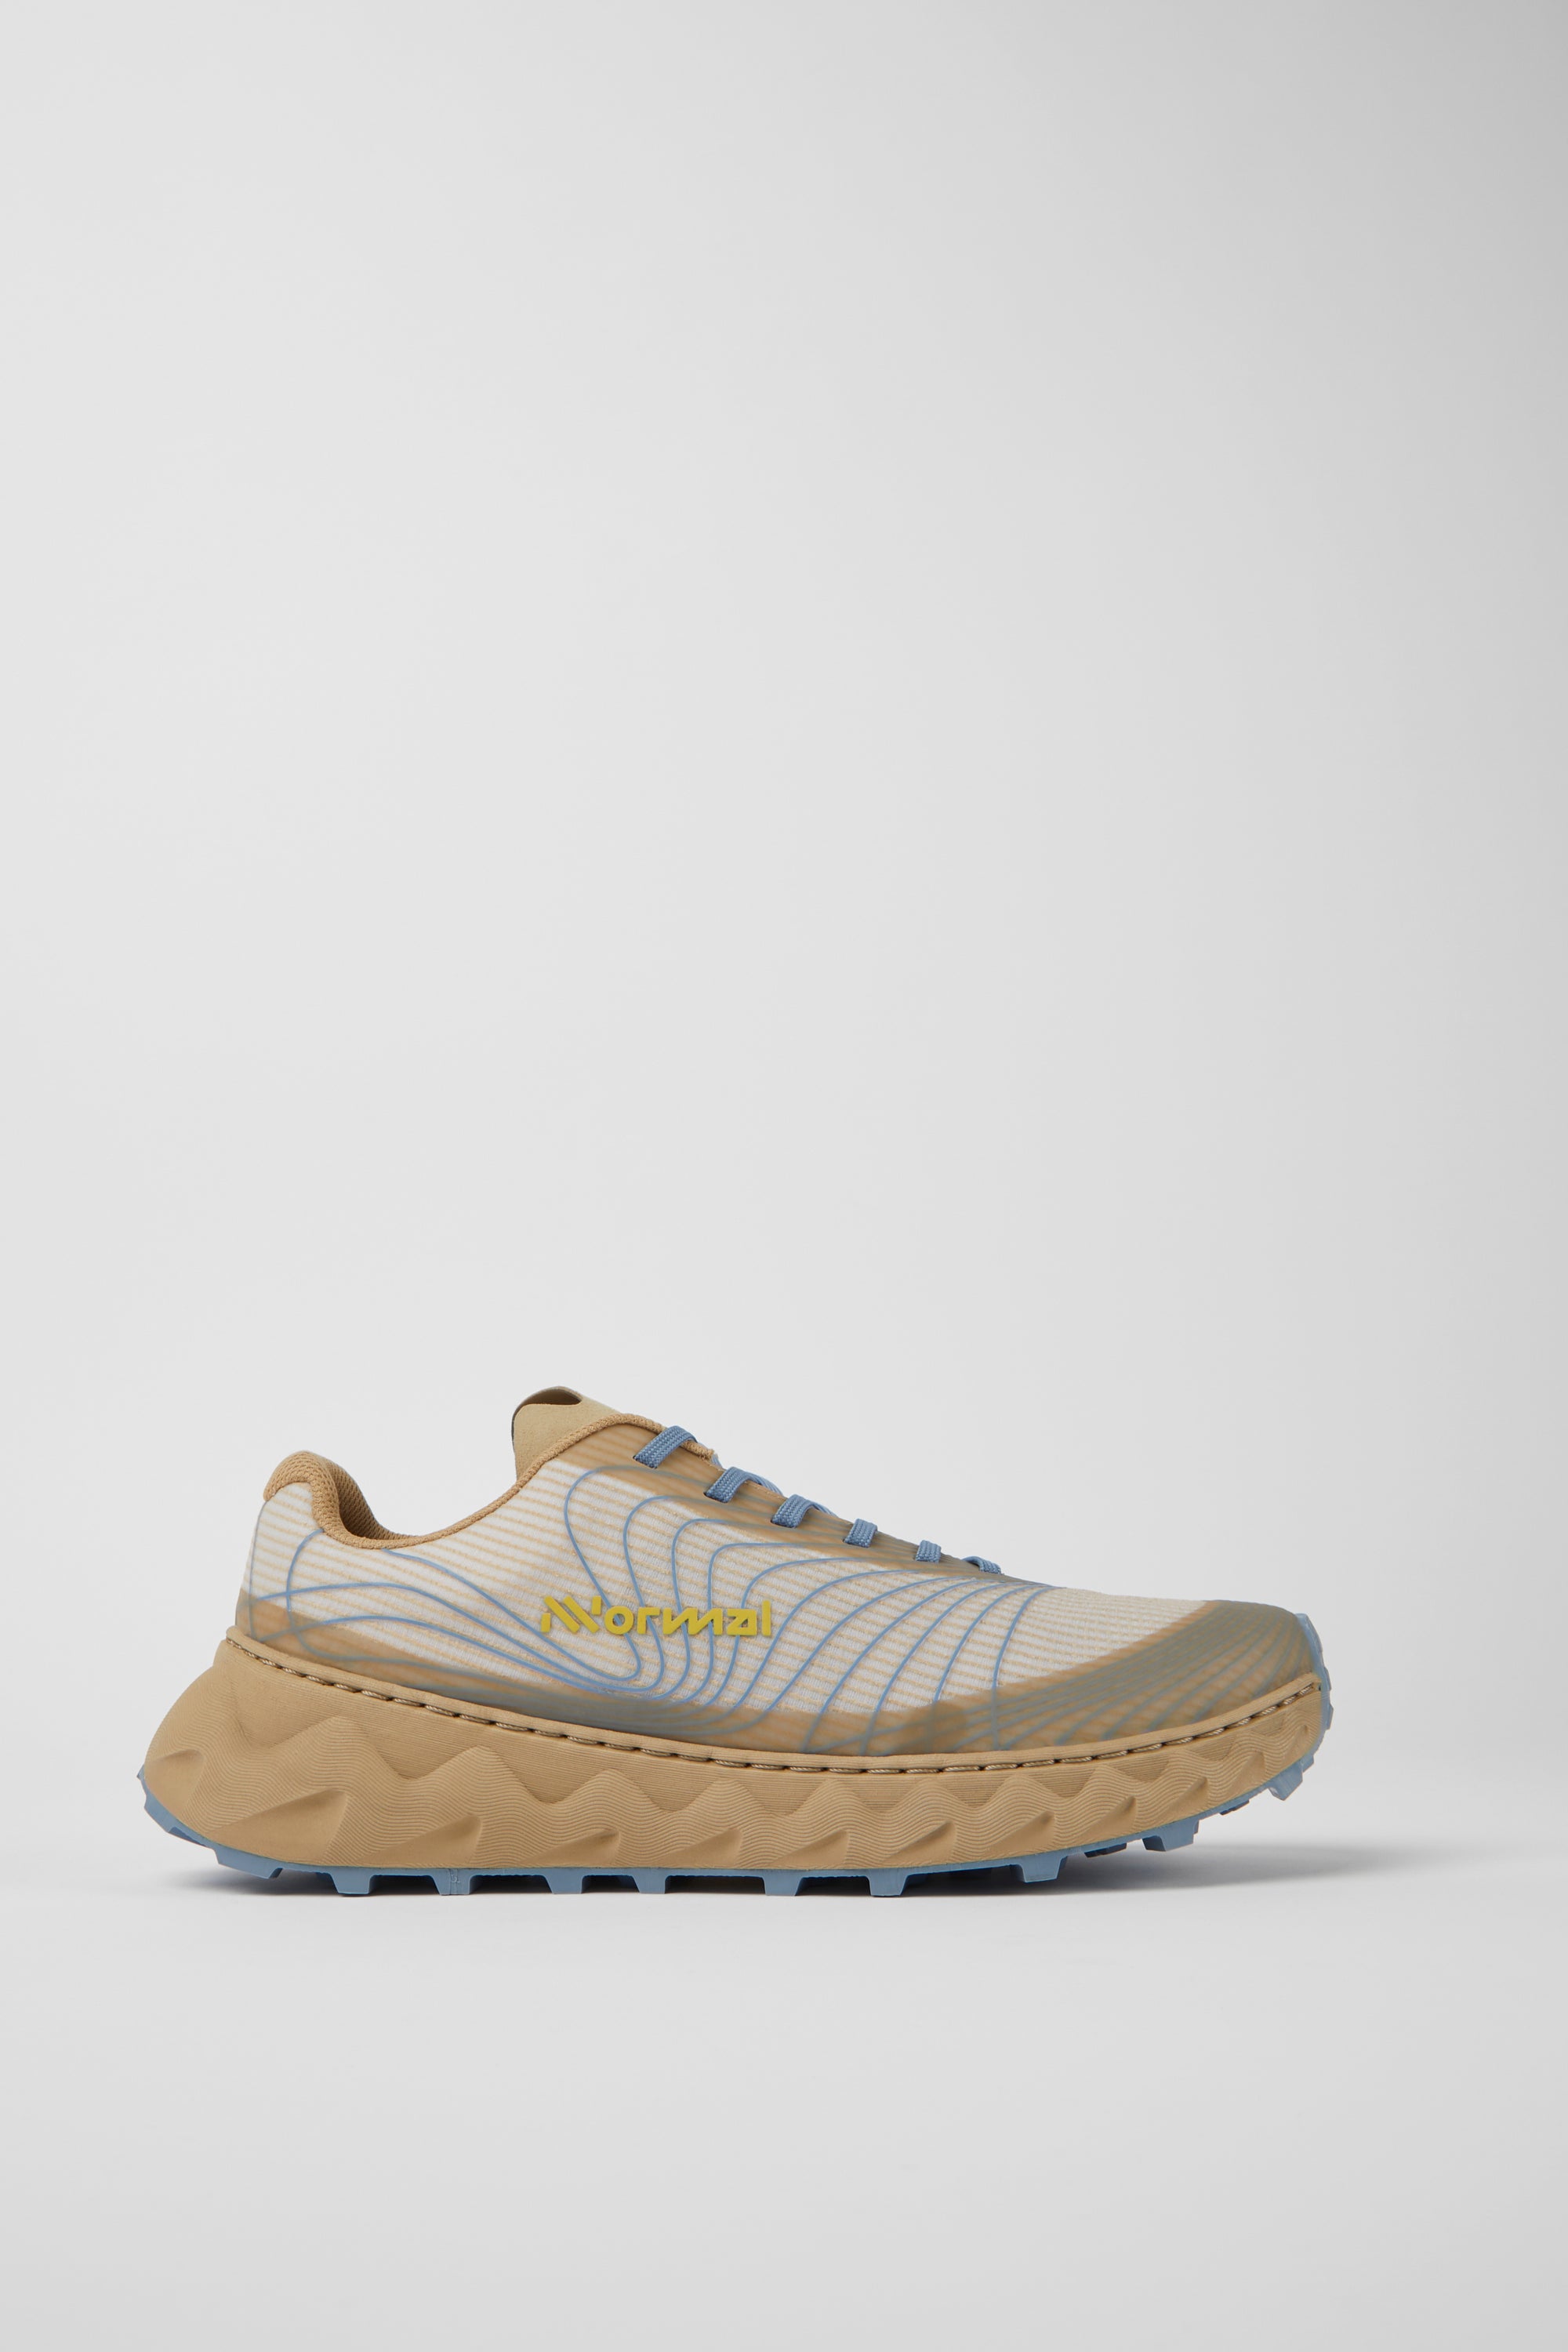 NNORMAL Tomir Trail Shoes - Unisex